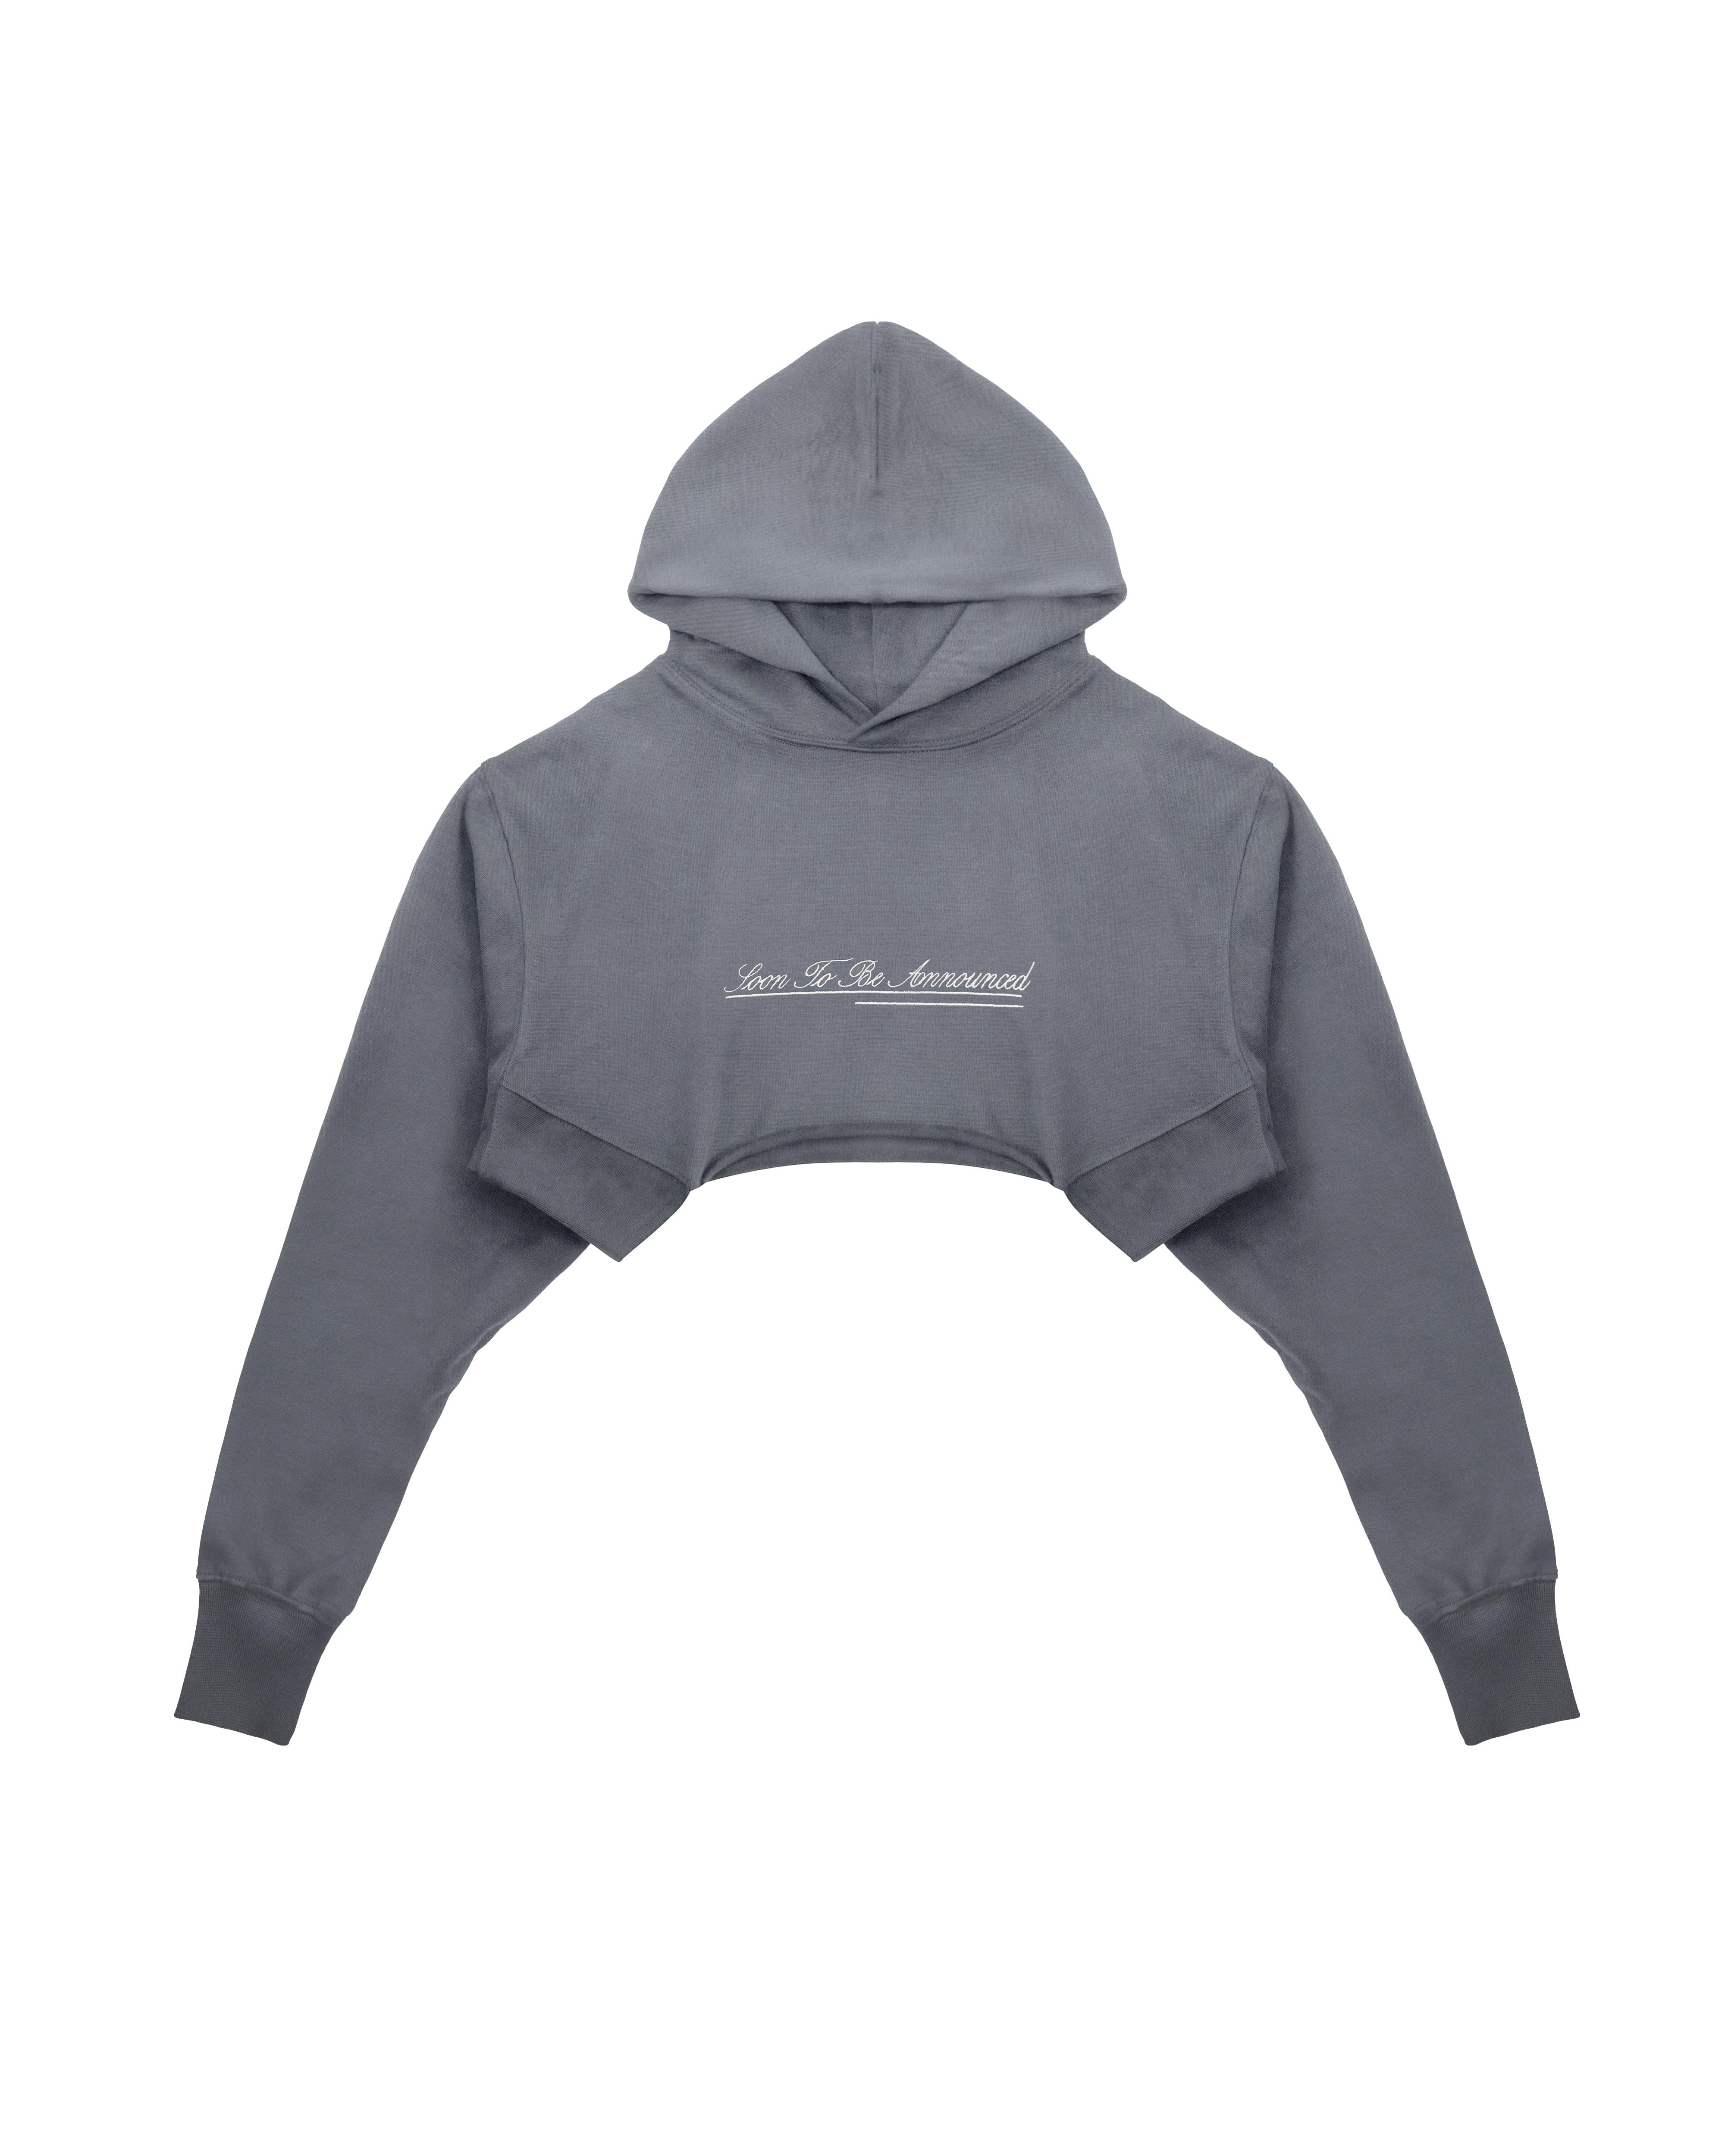 STBA Embroidery Crop Hoodie - SOON TO BE ANNOUNCED